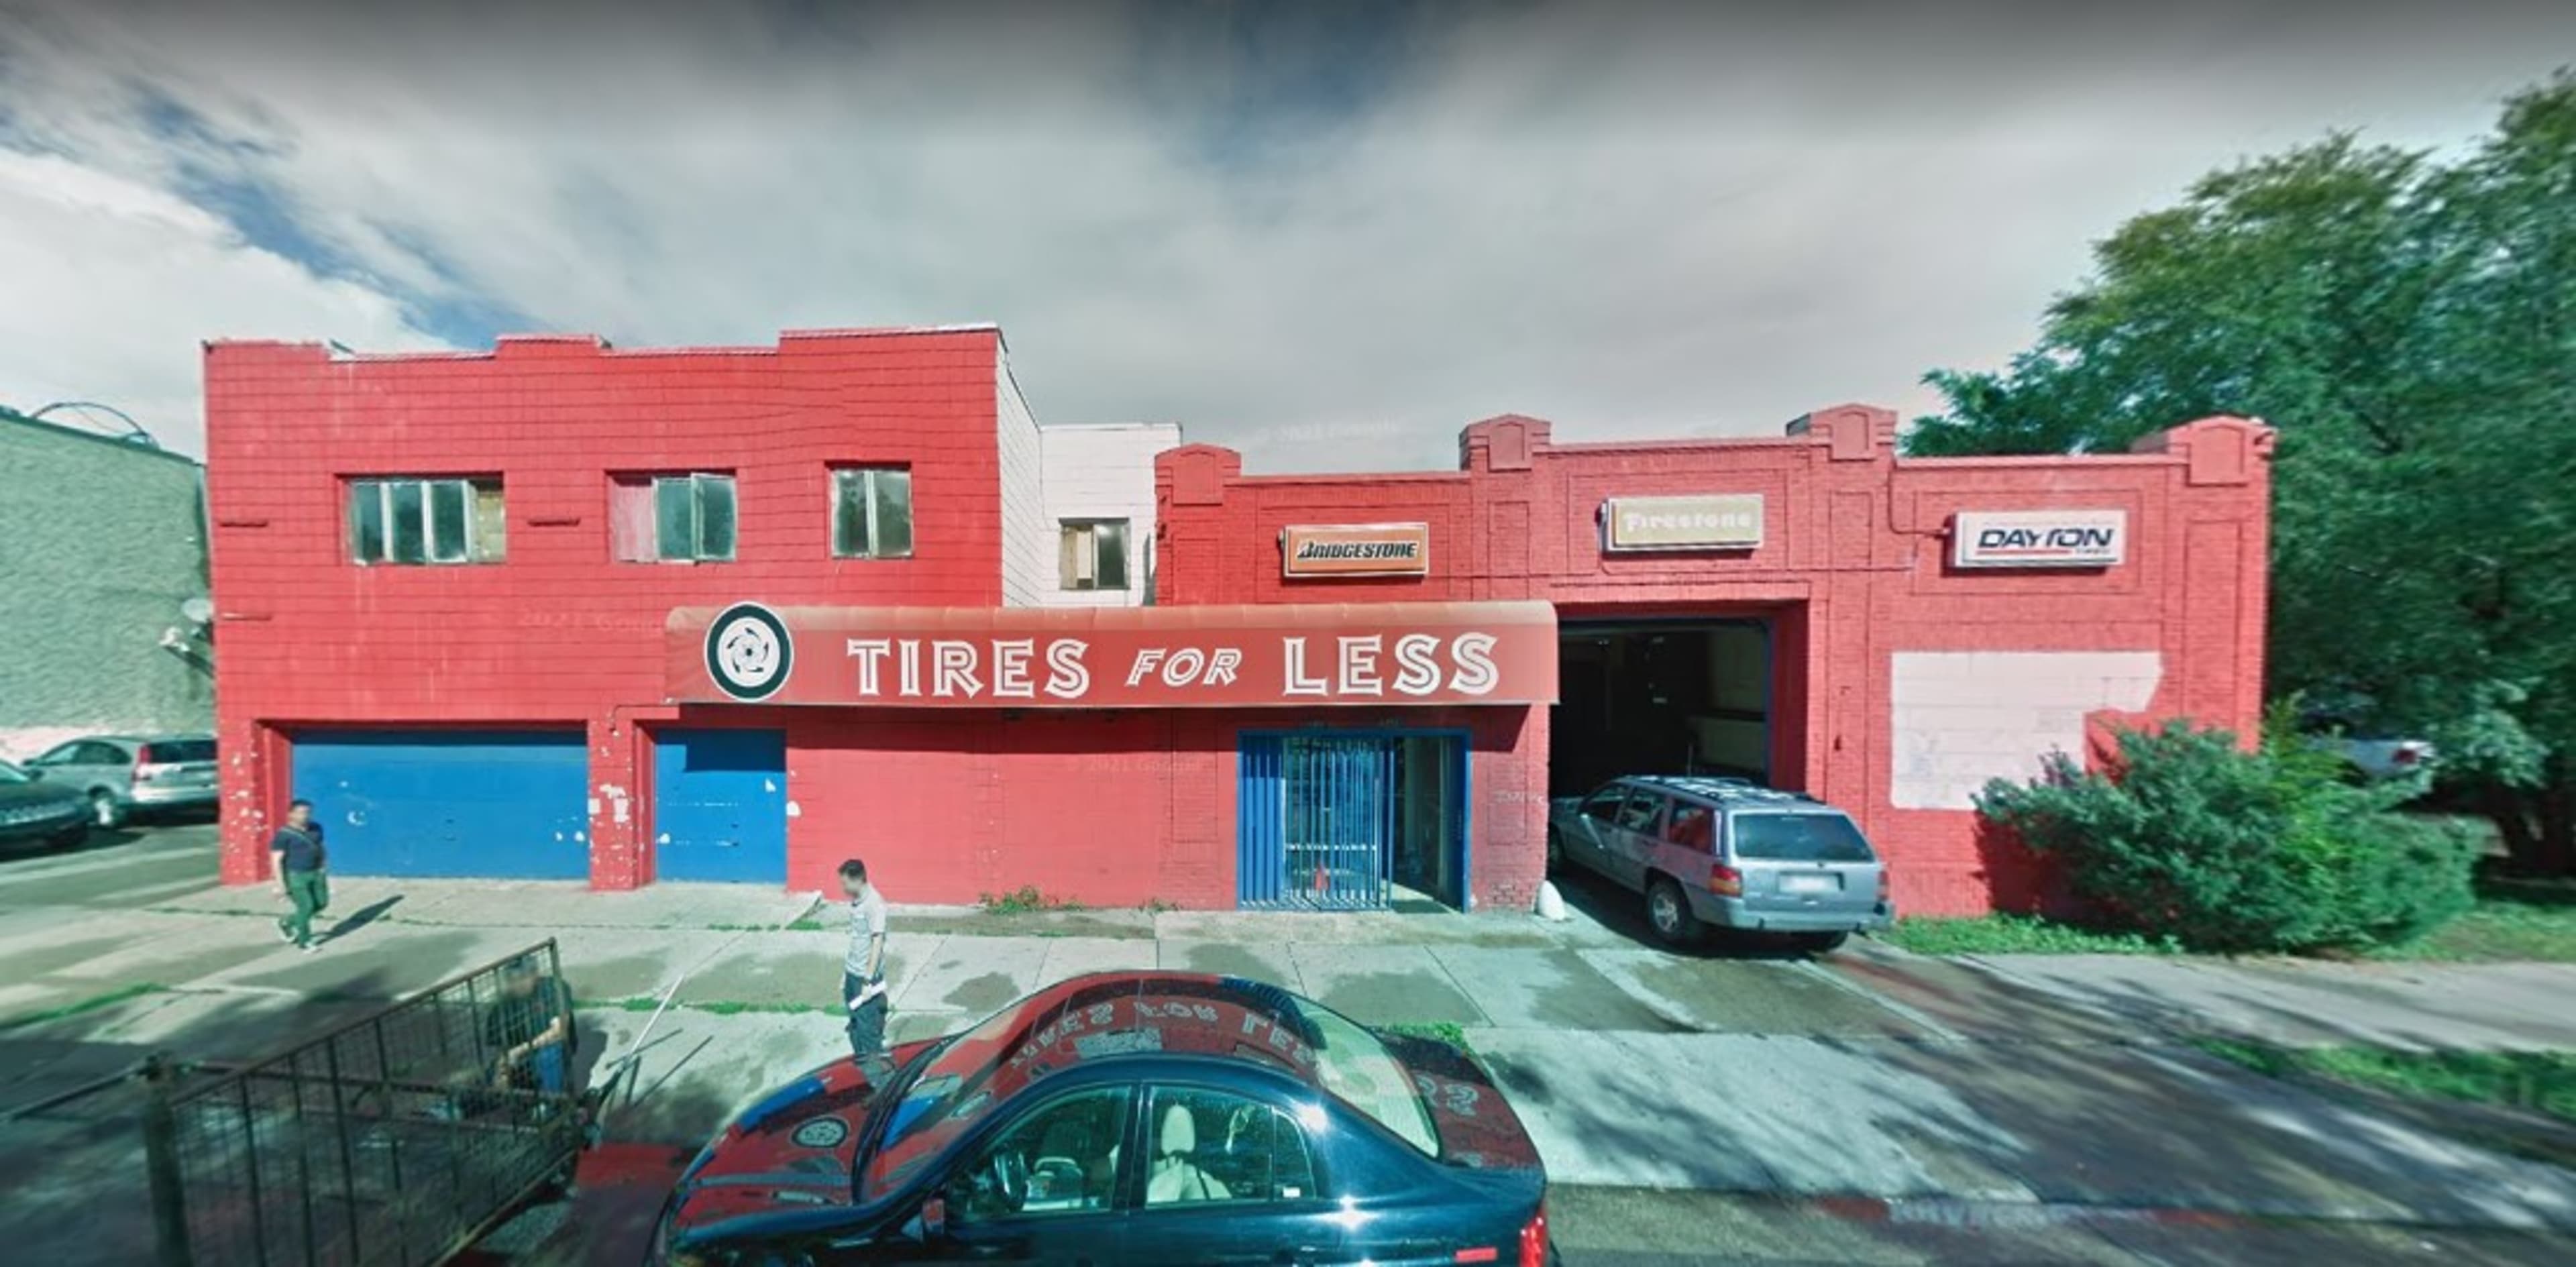 Tires For Less in Minneapolis, MN (3011 3rd Ave S): Tire Shop Near me